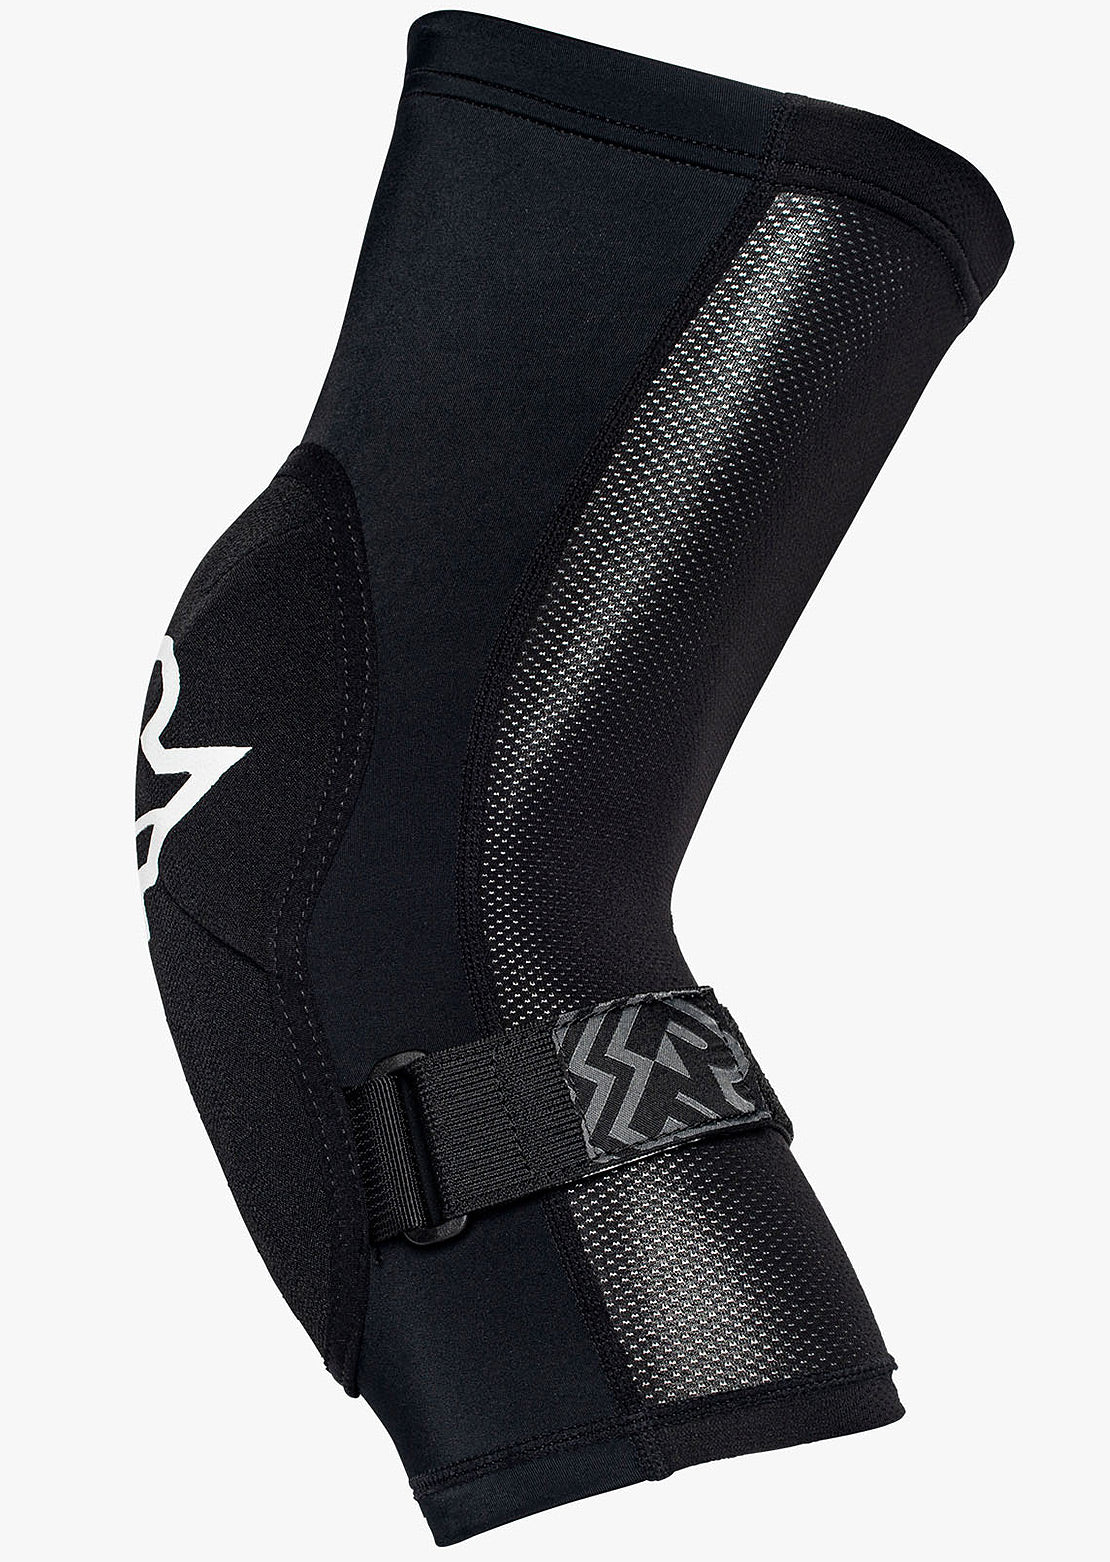 Race Face Indy Knee Guards Stealth